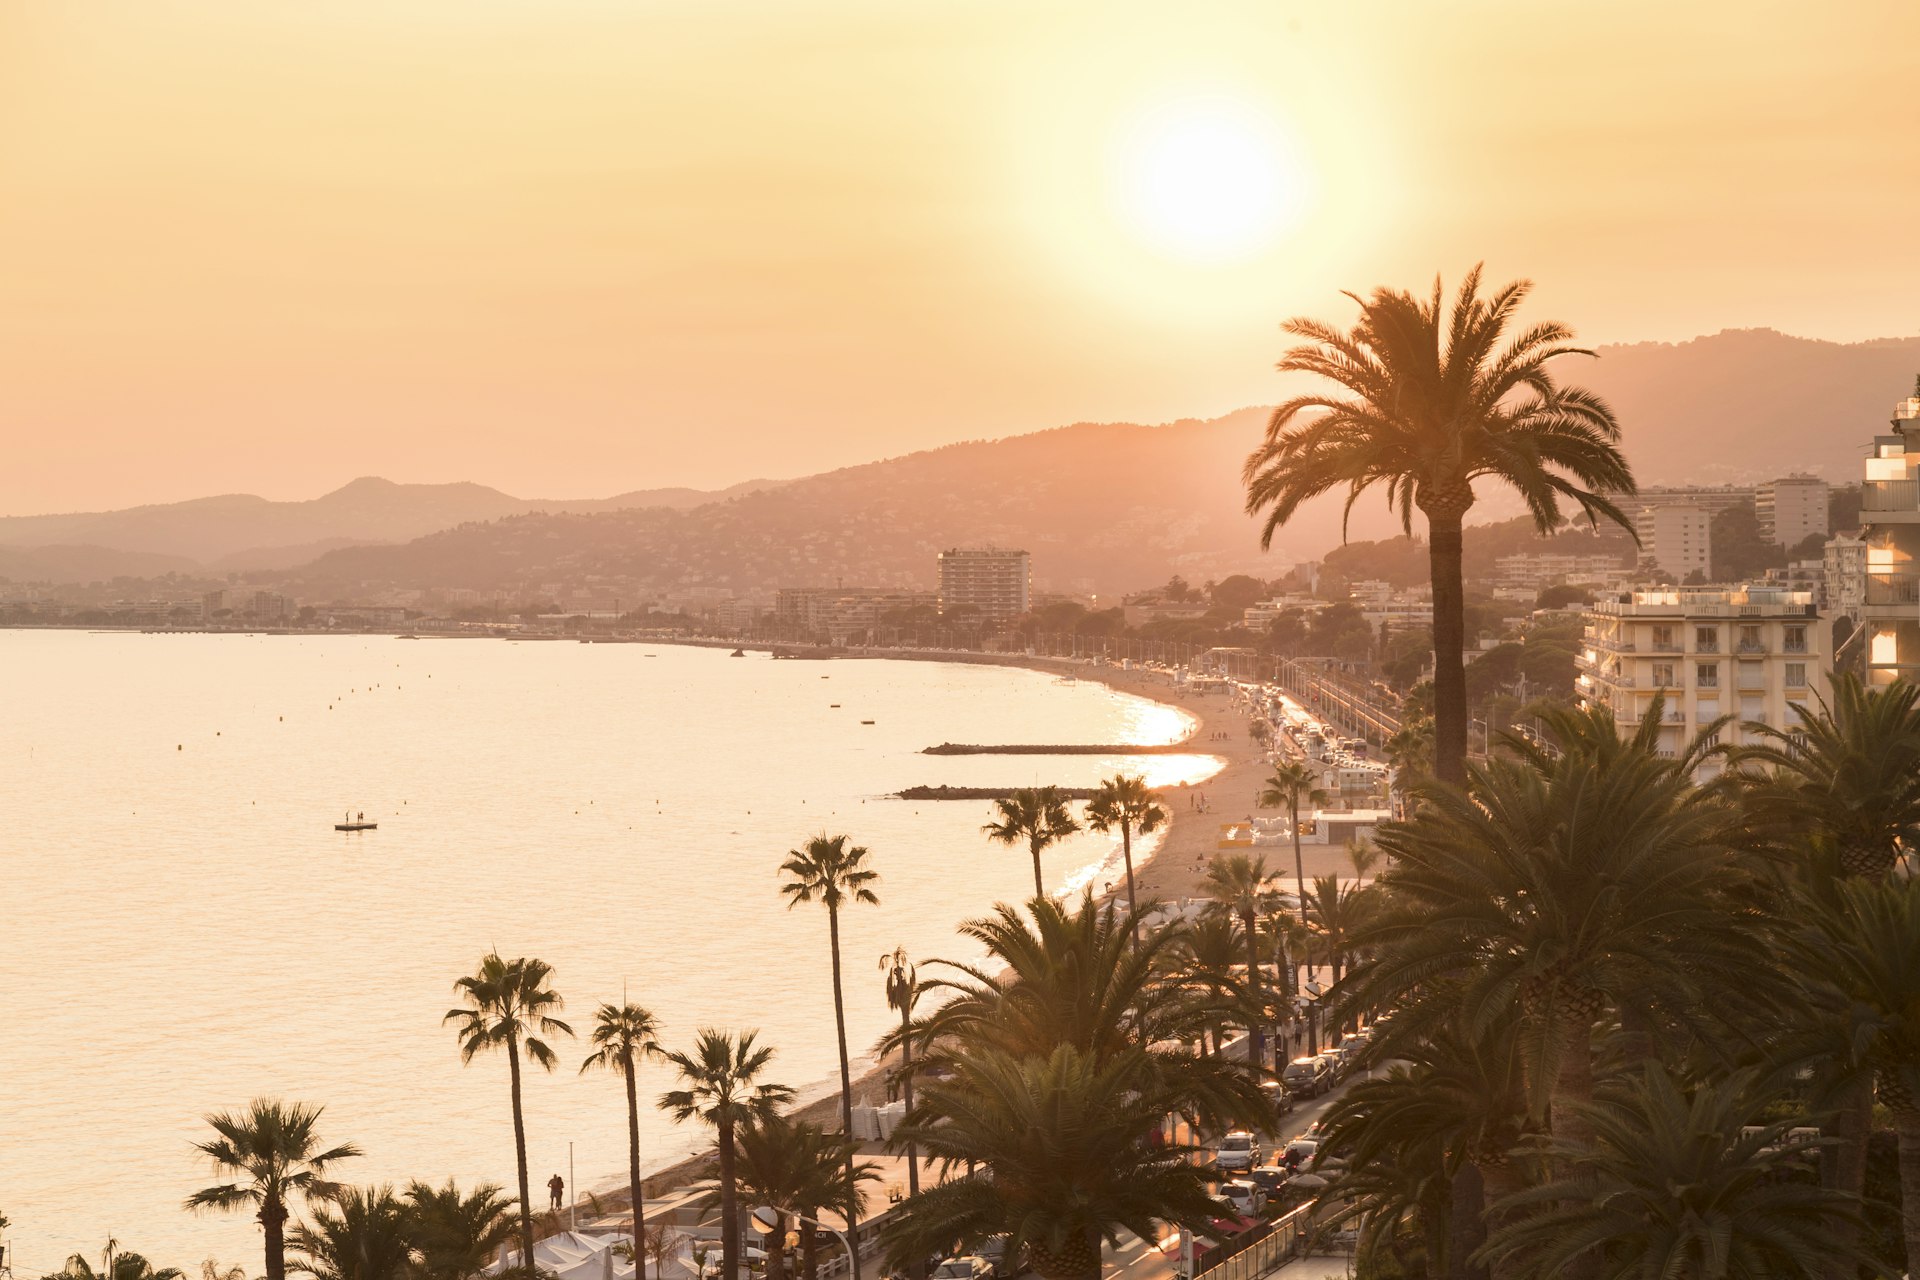 A sunset shot of a beach, with the city behind it. The palm trees are silhouettes dominating the shot